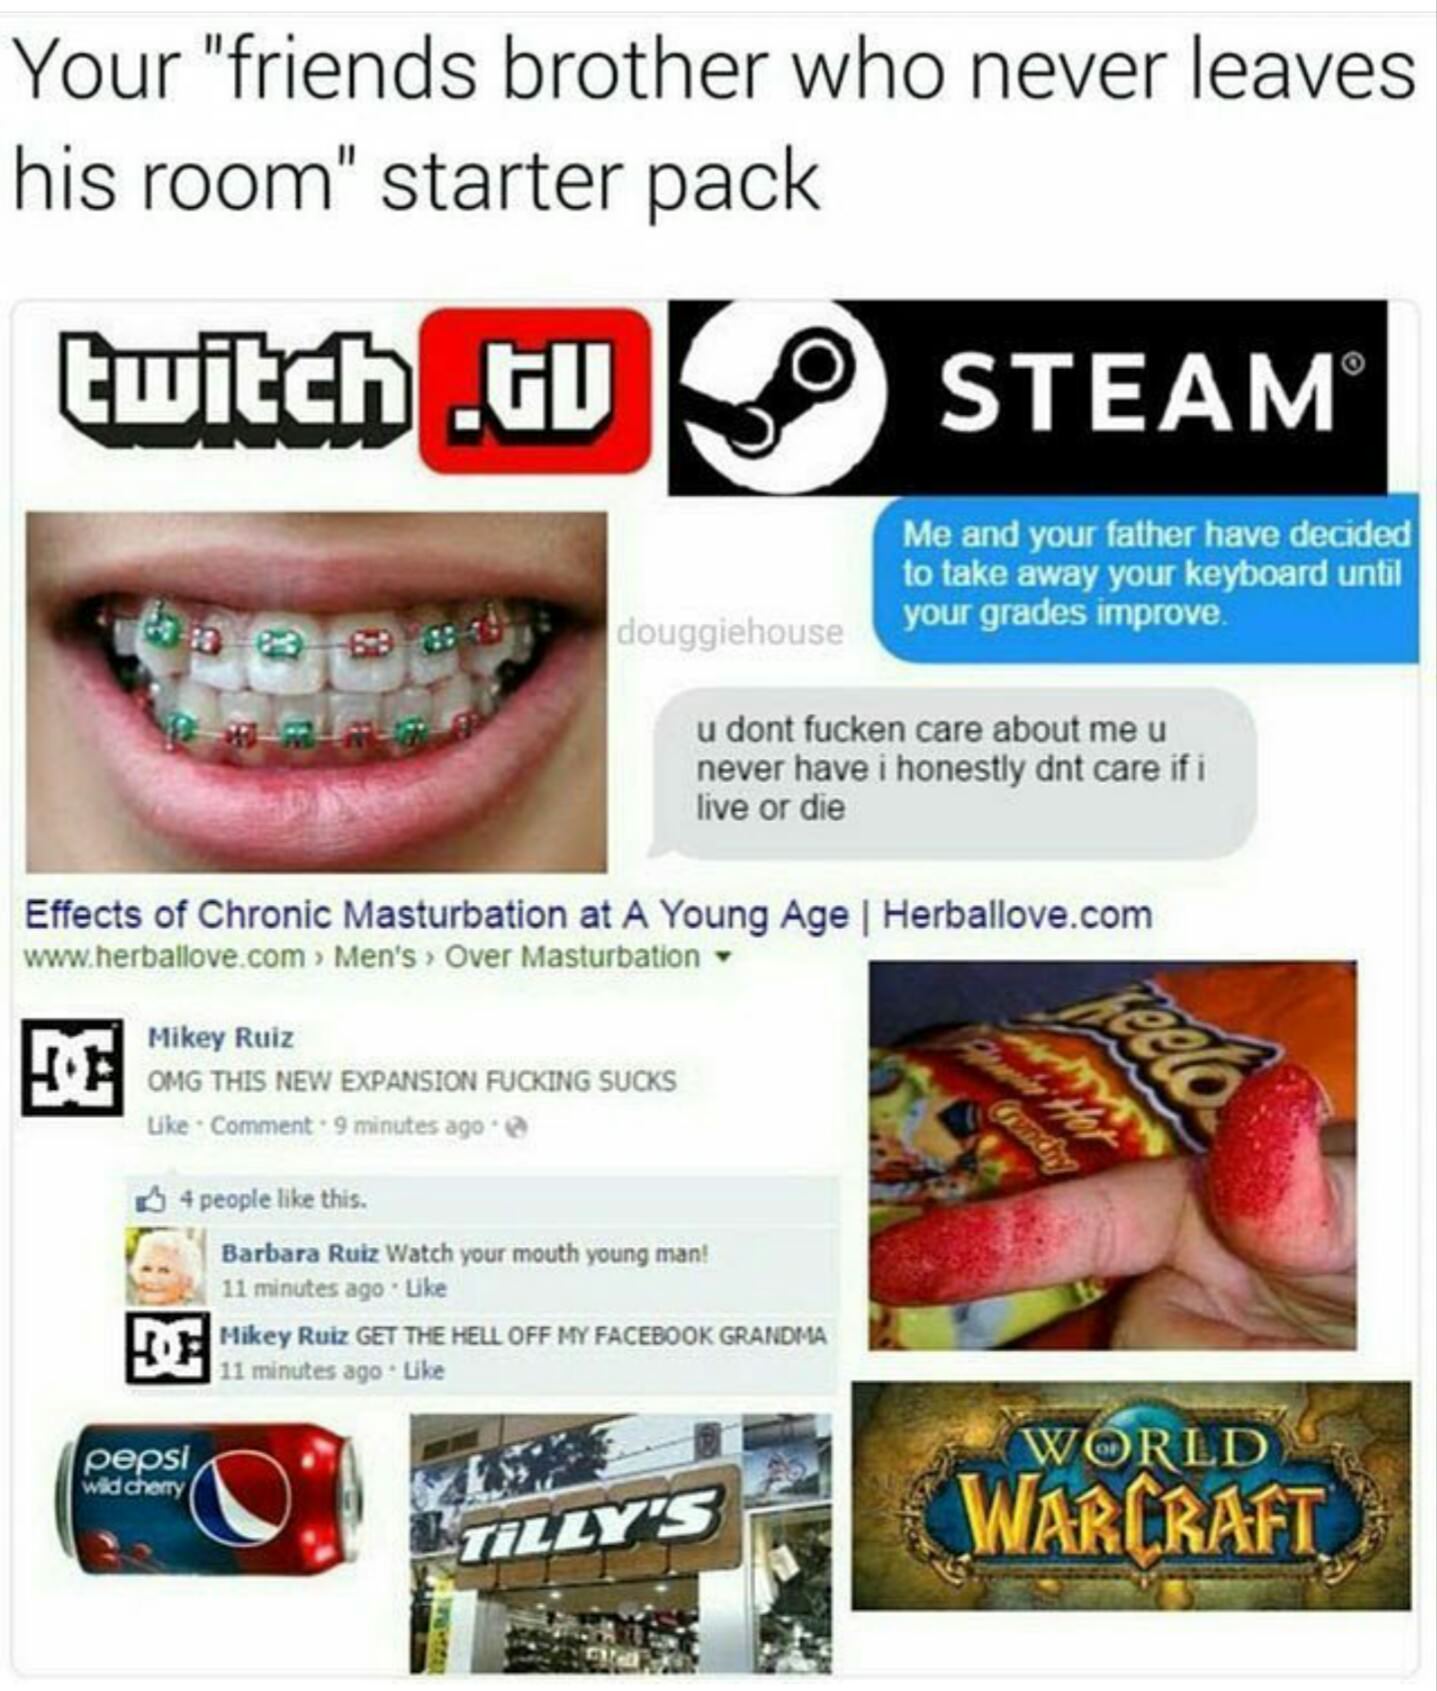 starter pack - nyc starter pack - Your "friends brother who never leaves his room" starter pack twitch.Gus Steam || Me and your father have decided to take away your keyboard until your grades improve. douggiehouse u dont fucken care about me u never have